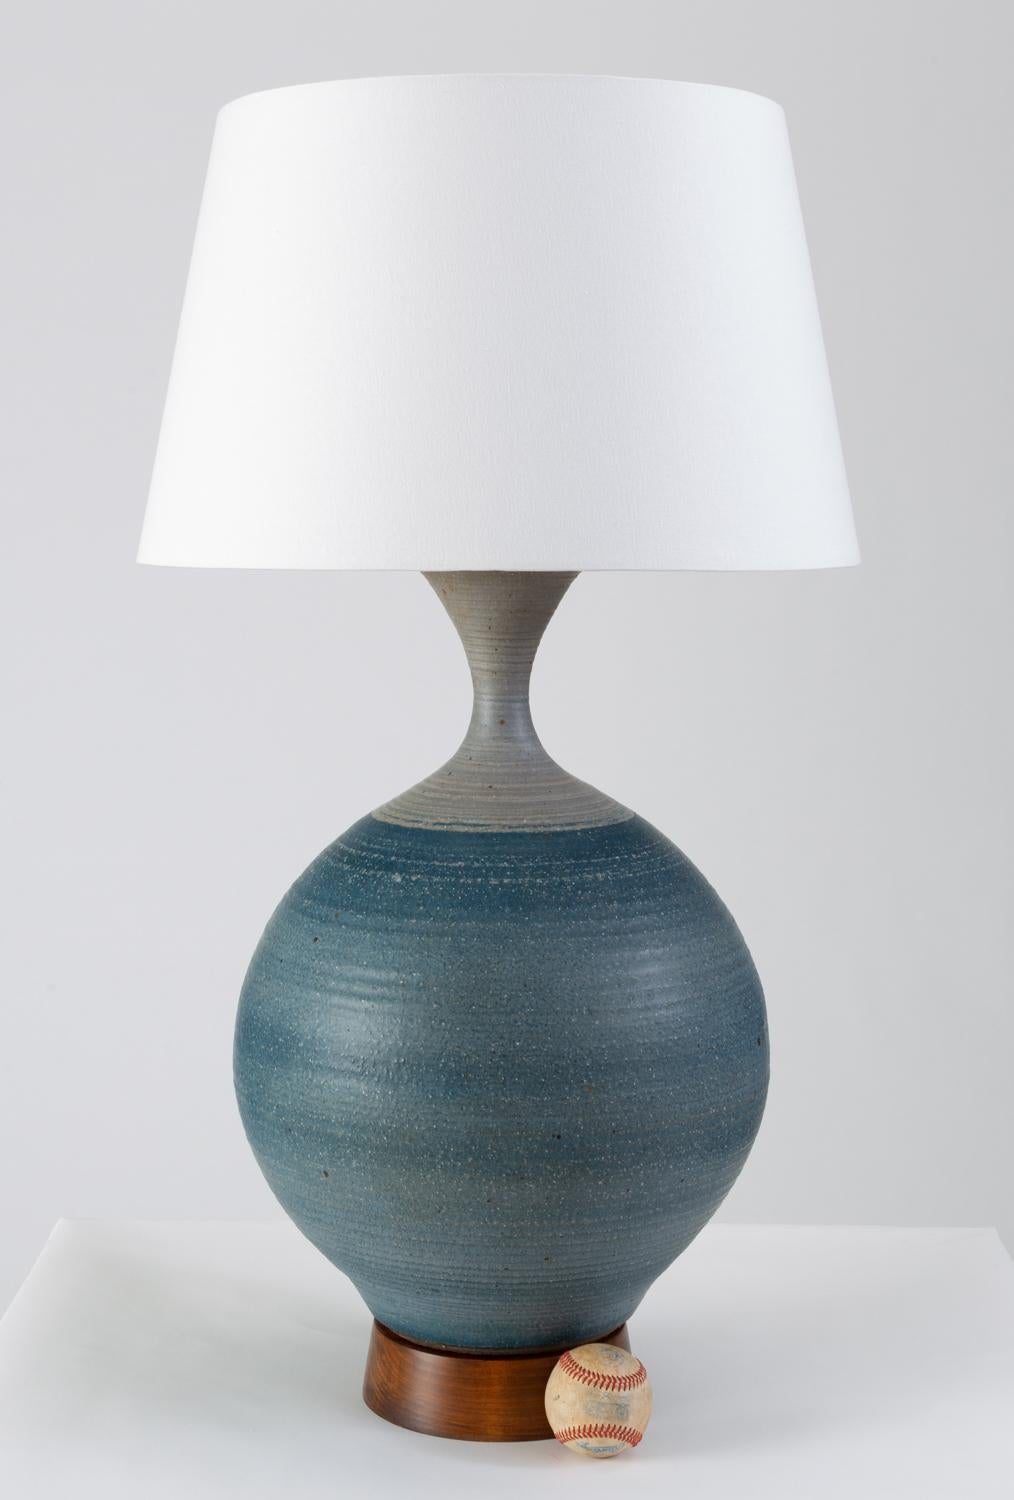 A large stoneware lamp by California ceramicist Bob Kinzie for his company, Affiliated Craftsmen with a curved body and wooden plinth base. The wheel-thrown ceramic body of the lamp is slightly textured and has a color-blocked glaze pattern in cyan